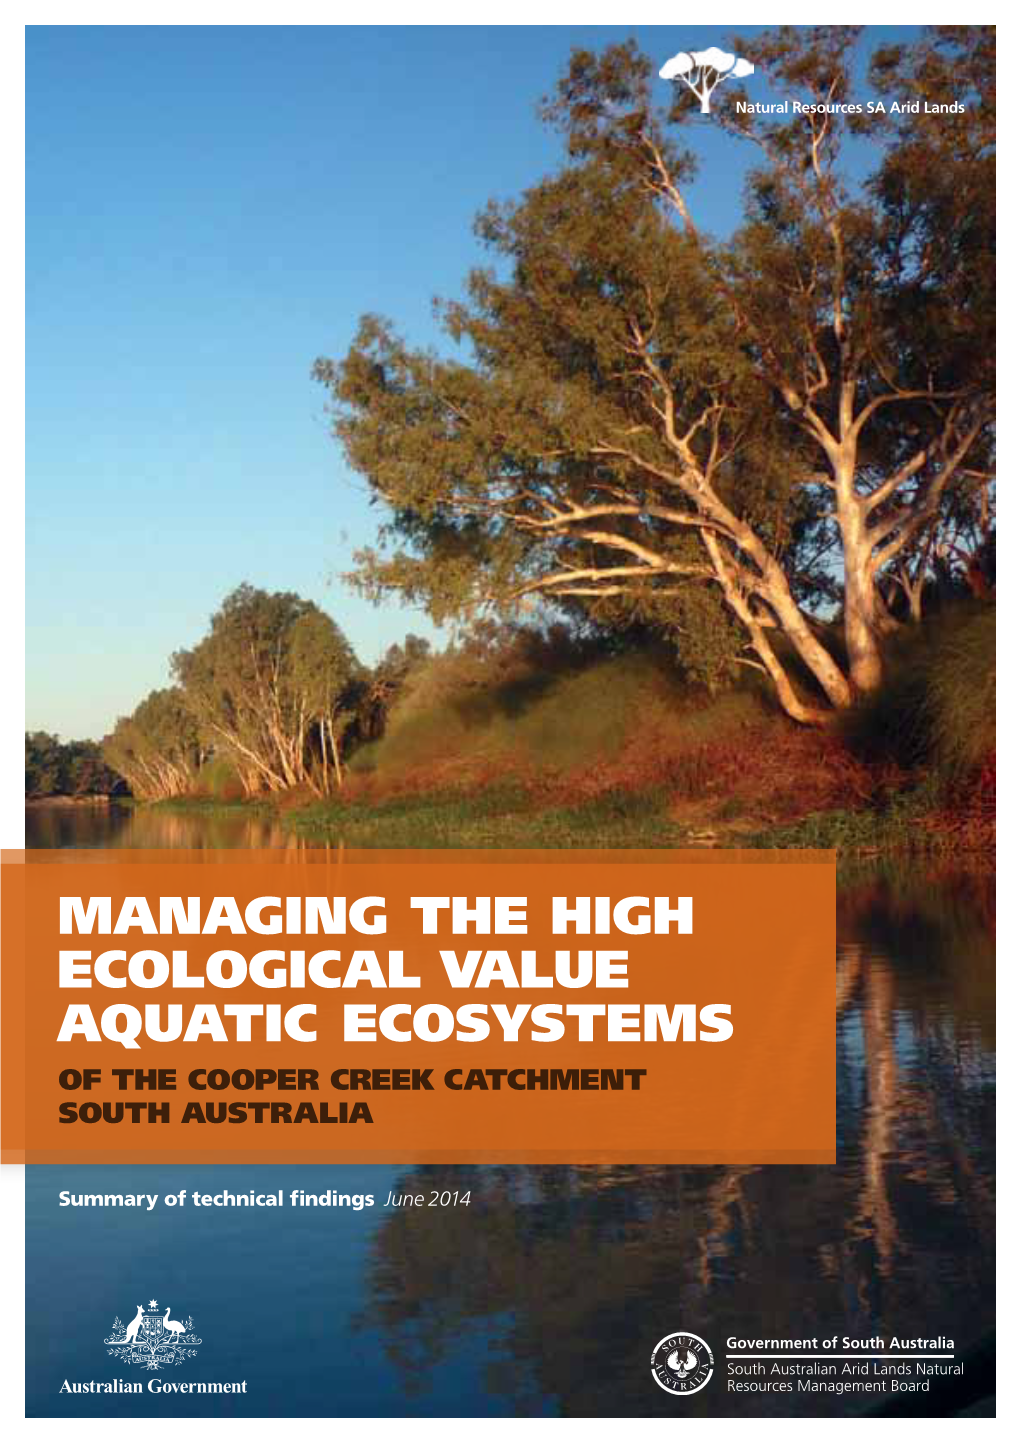 Managing the High Ecological Value Aquatic Ecosystems of the Cooper Creek Catchment South Australia